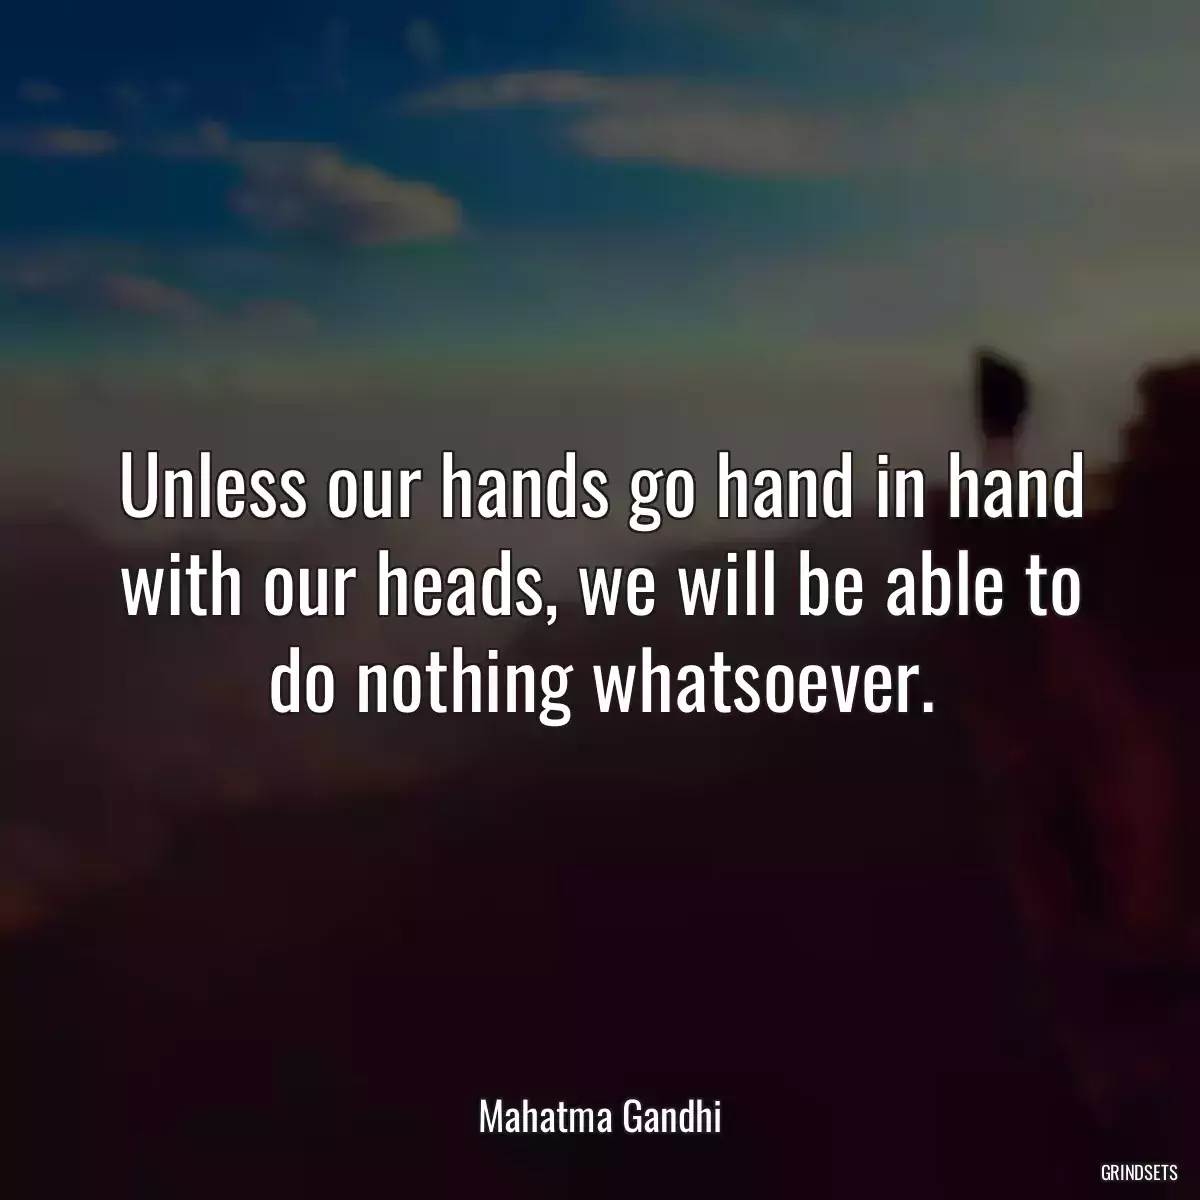 Unless our hands go hand in hand with our heads, we will be able to do nothing whatsoever.